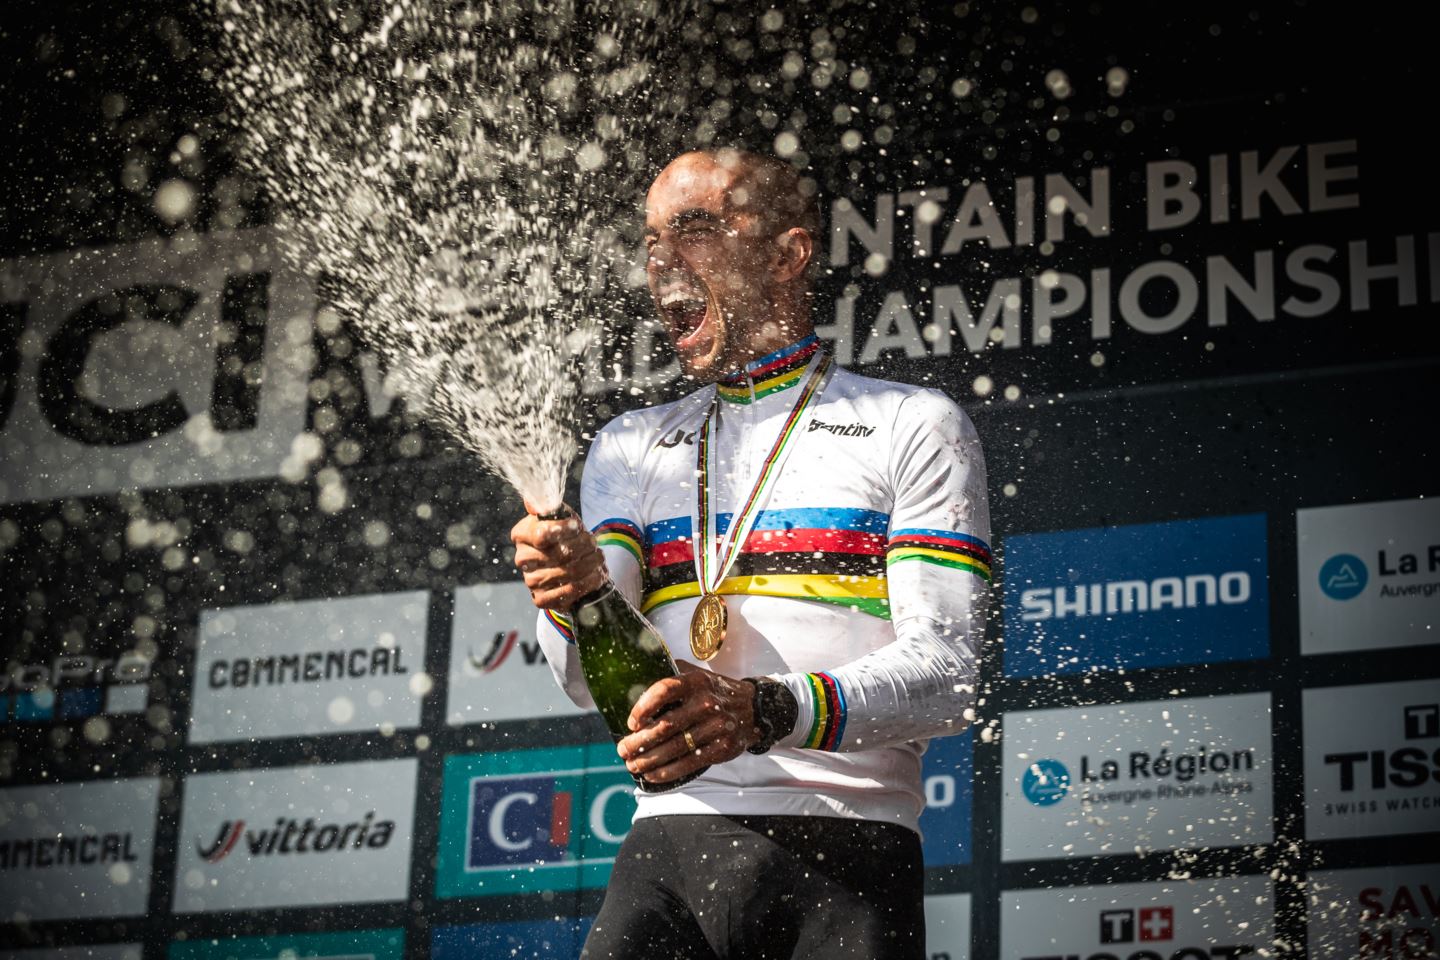 Nino Schurter standing on the podium for his 10th World Championship title.